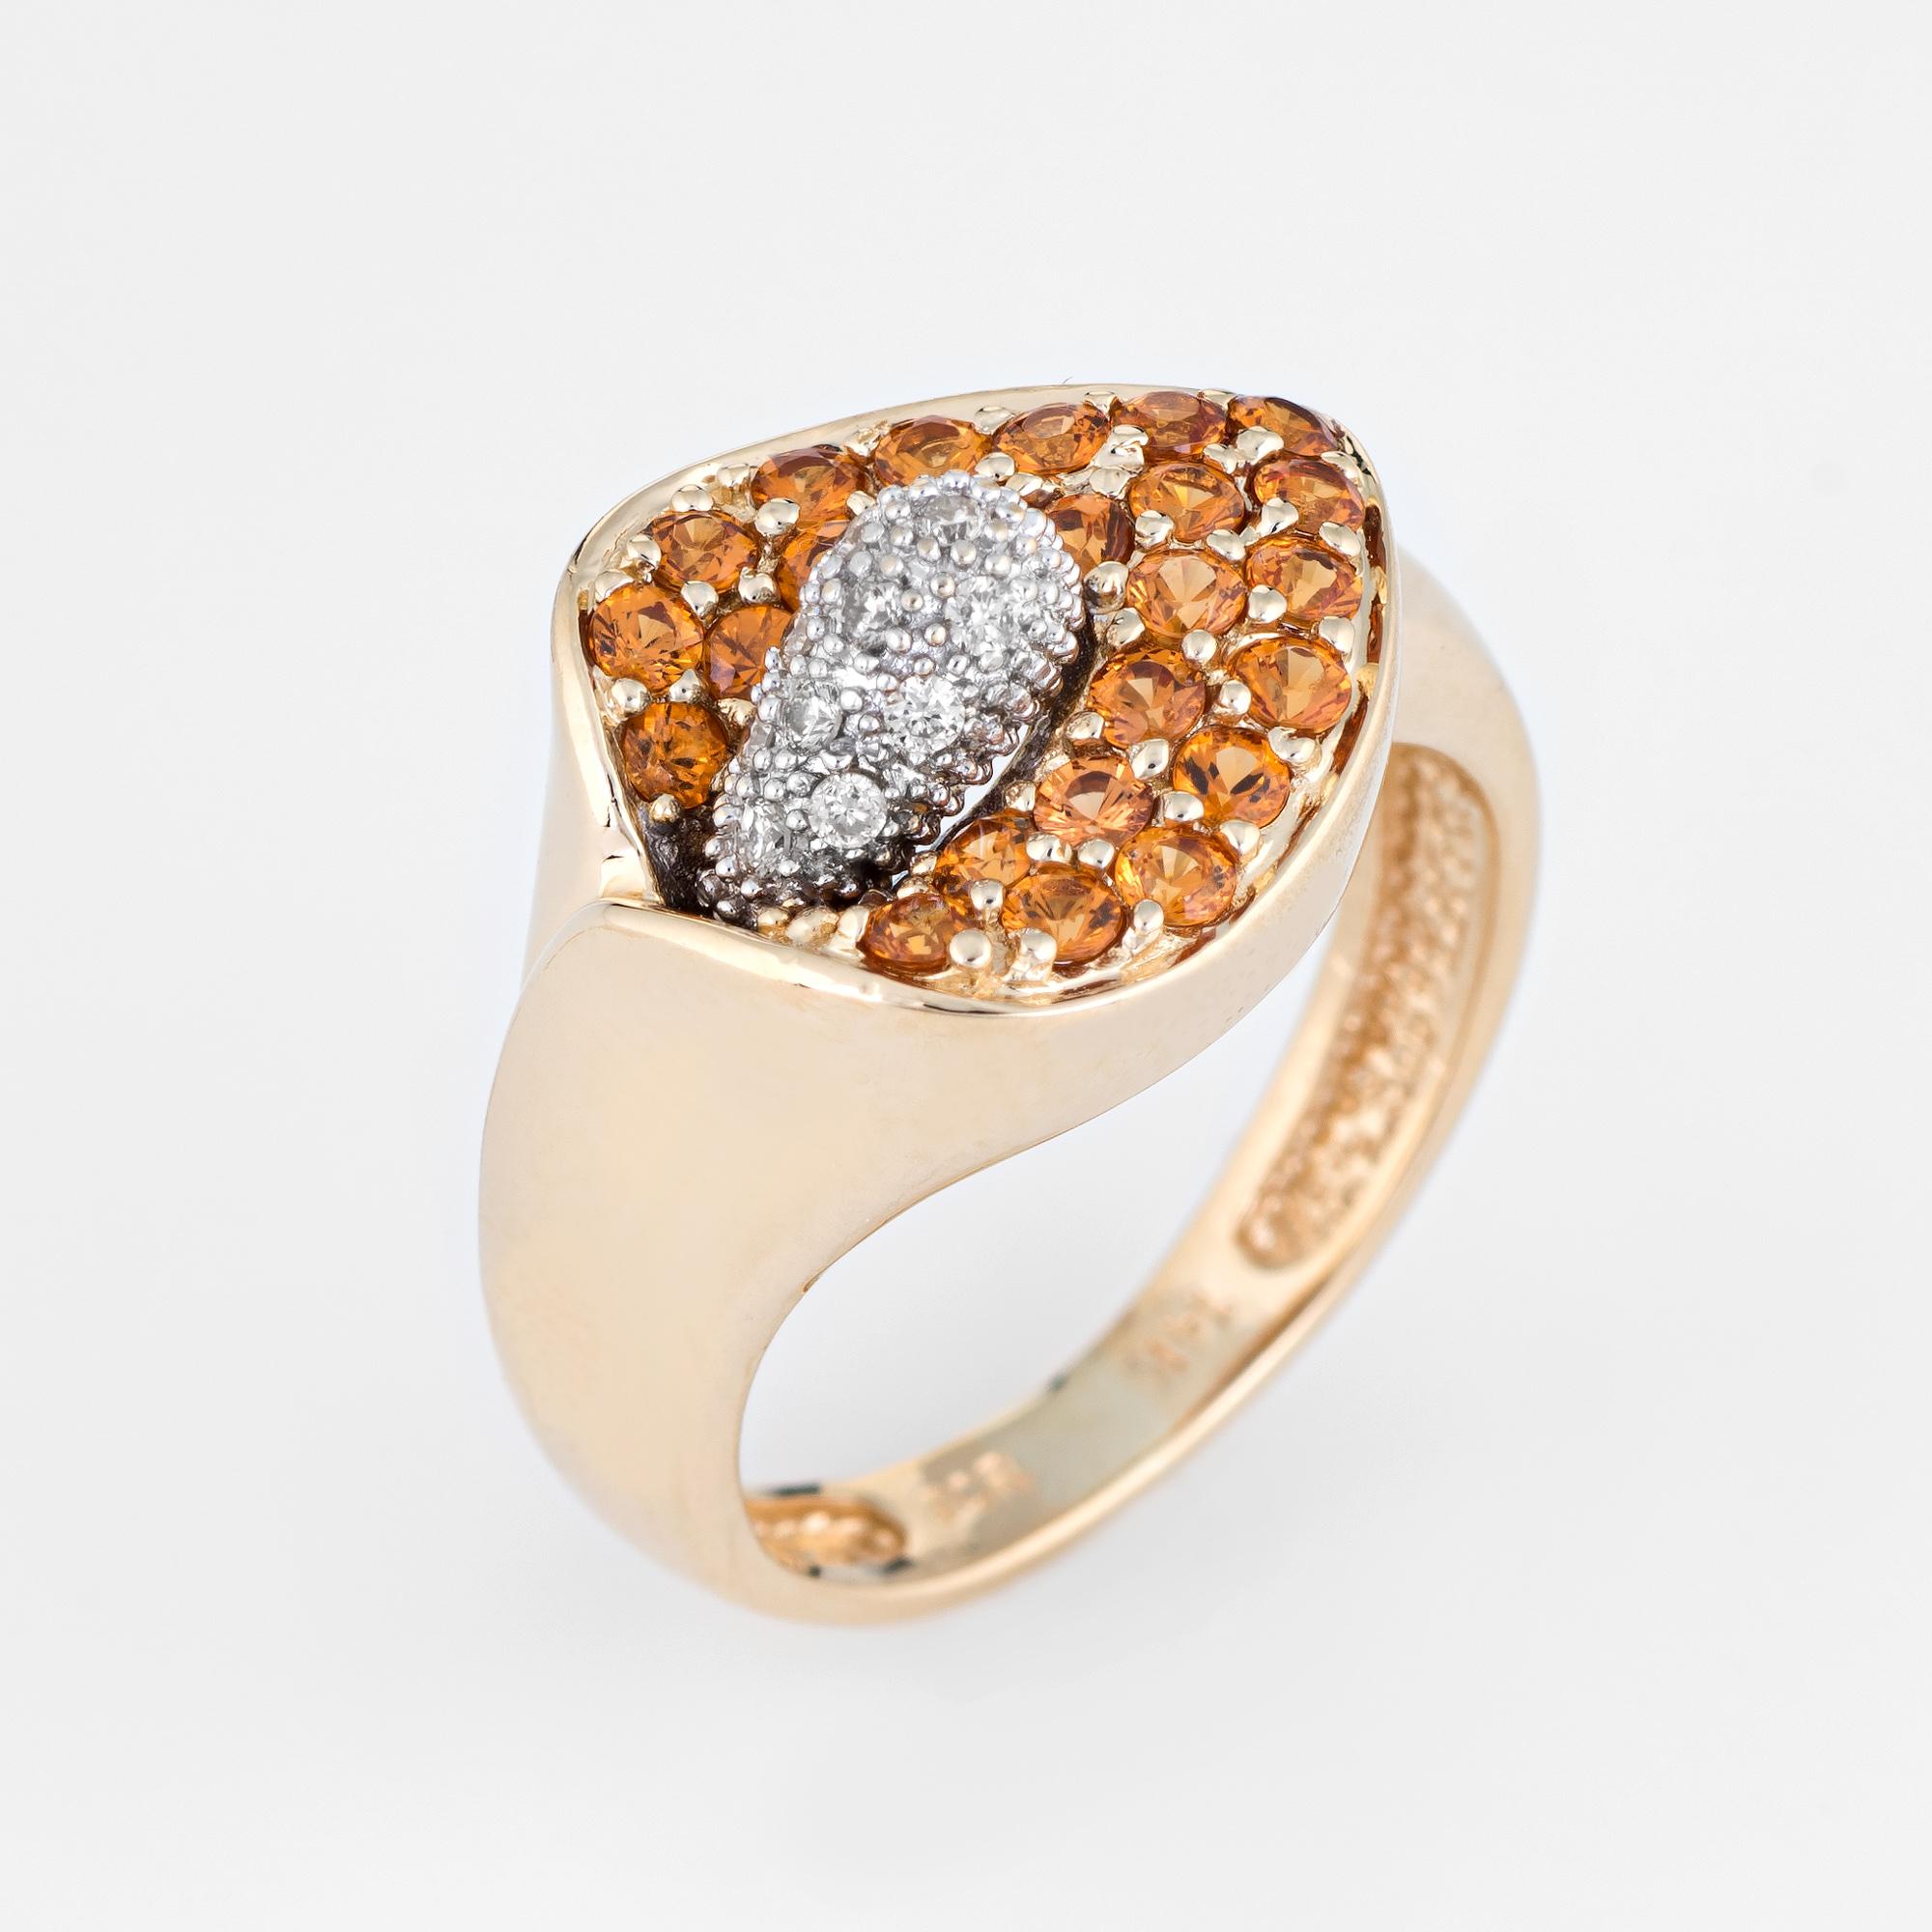 Finely detailed estate calla lily citrine & diamond cocktail ring, crafted in 14 karat yellow gold. 

25 citrines are estimated at 0.02 carats each and total an estimated 0.50 carats. The diamonds total an estimated 0.05 carats (estimated at H-I